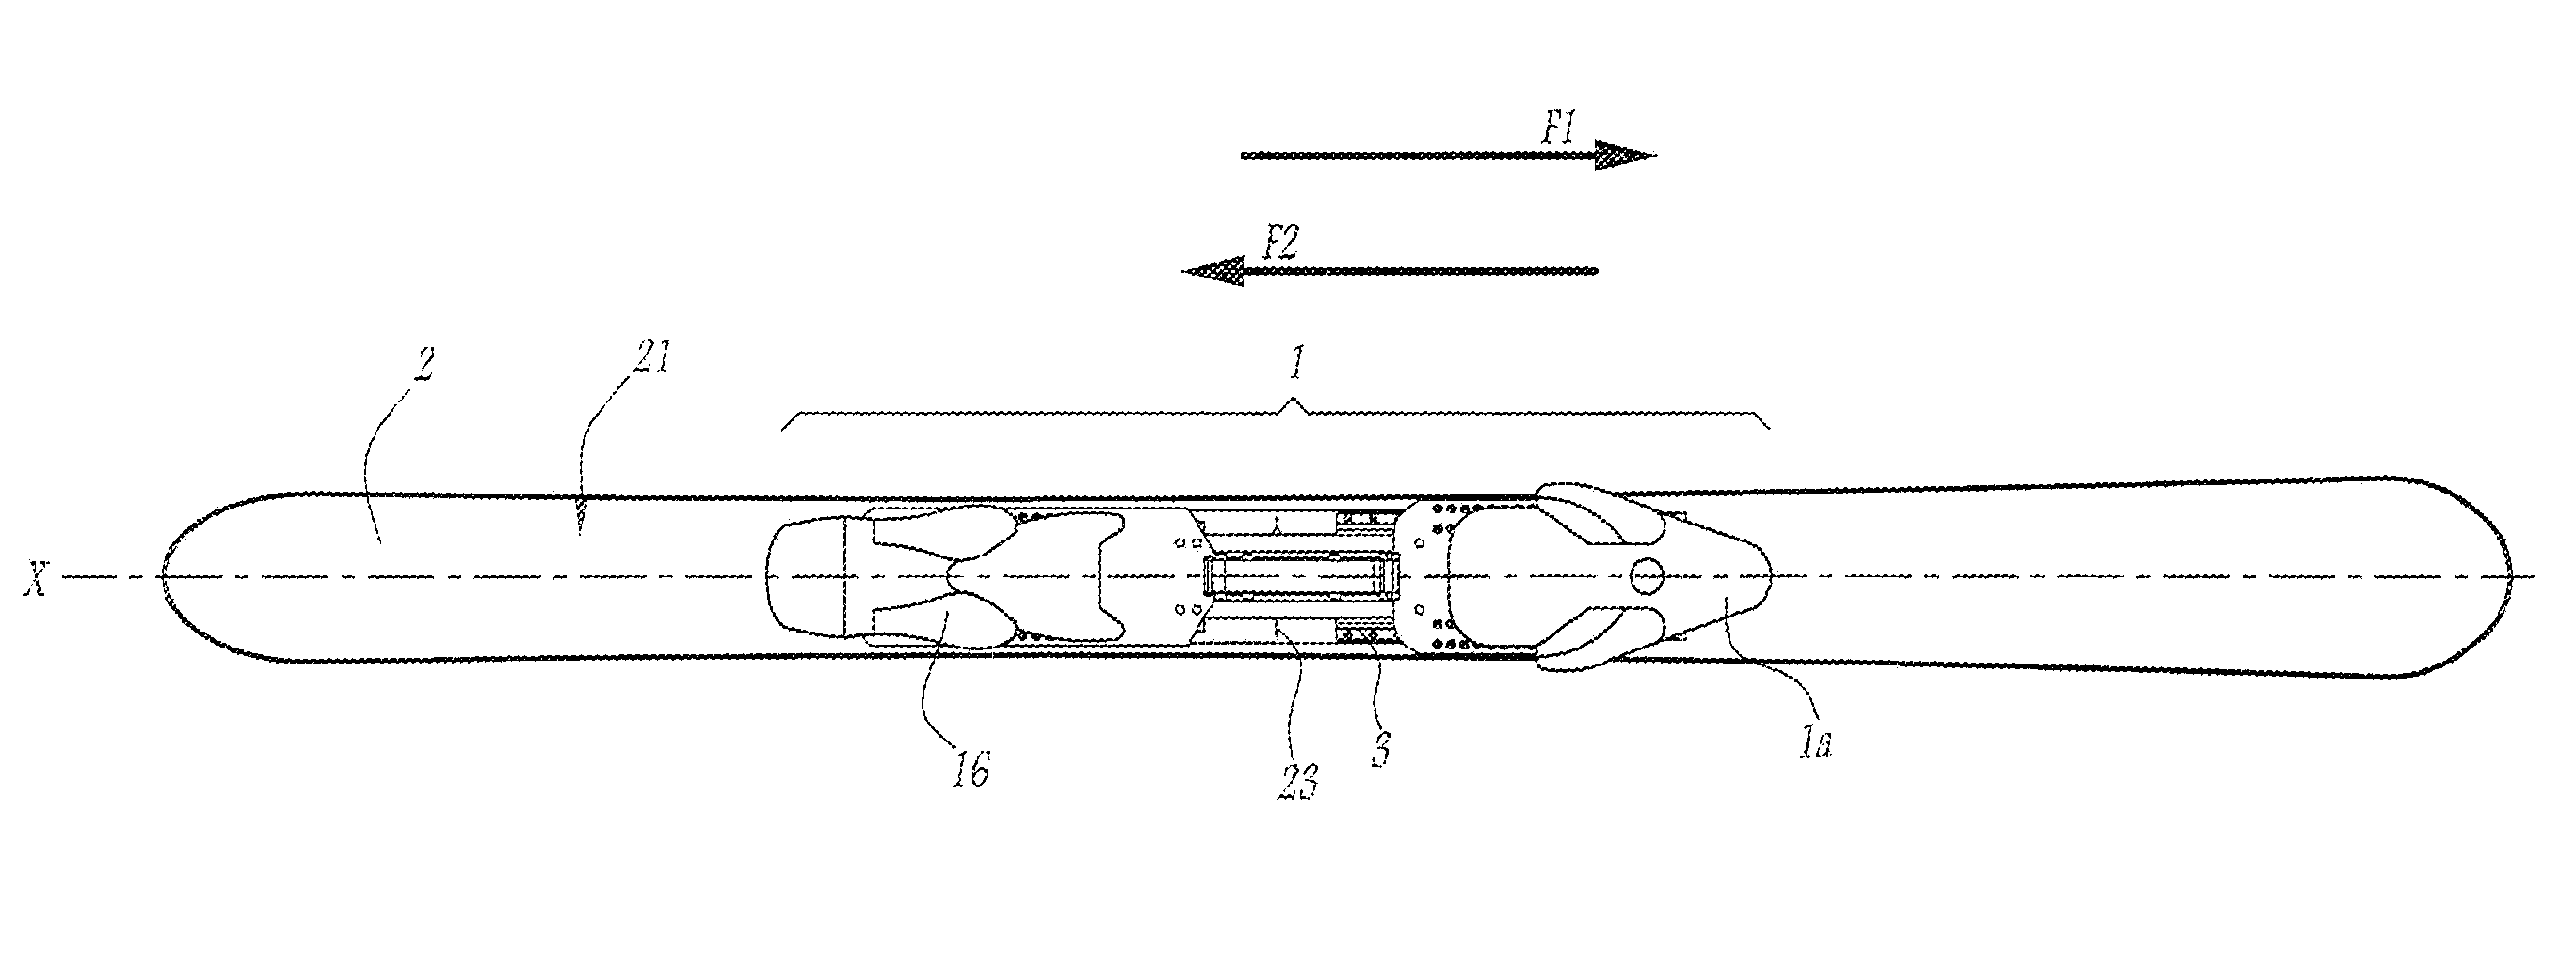 Binding for a boot on a gliding board and a gliding board equipped with such binding